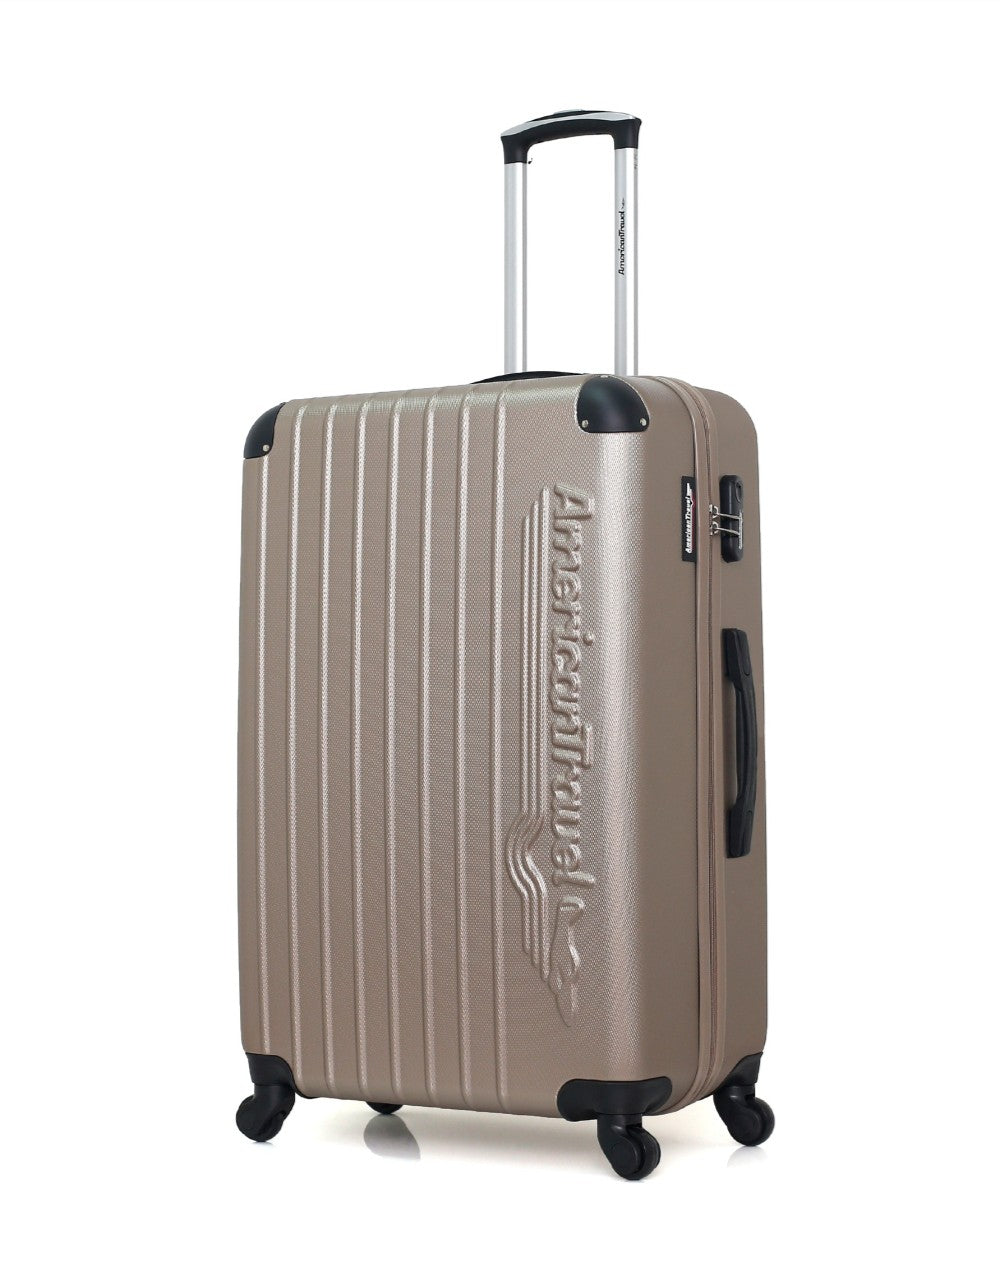 Valise Grand Format ABS BUDAPEST 4 Roues 75 cm